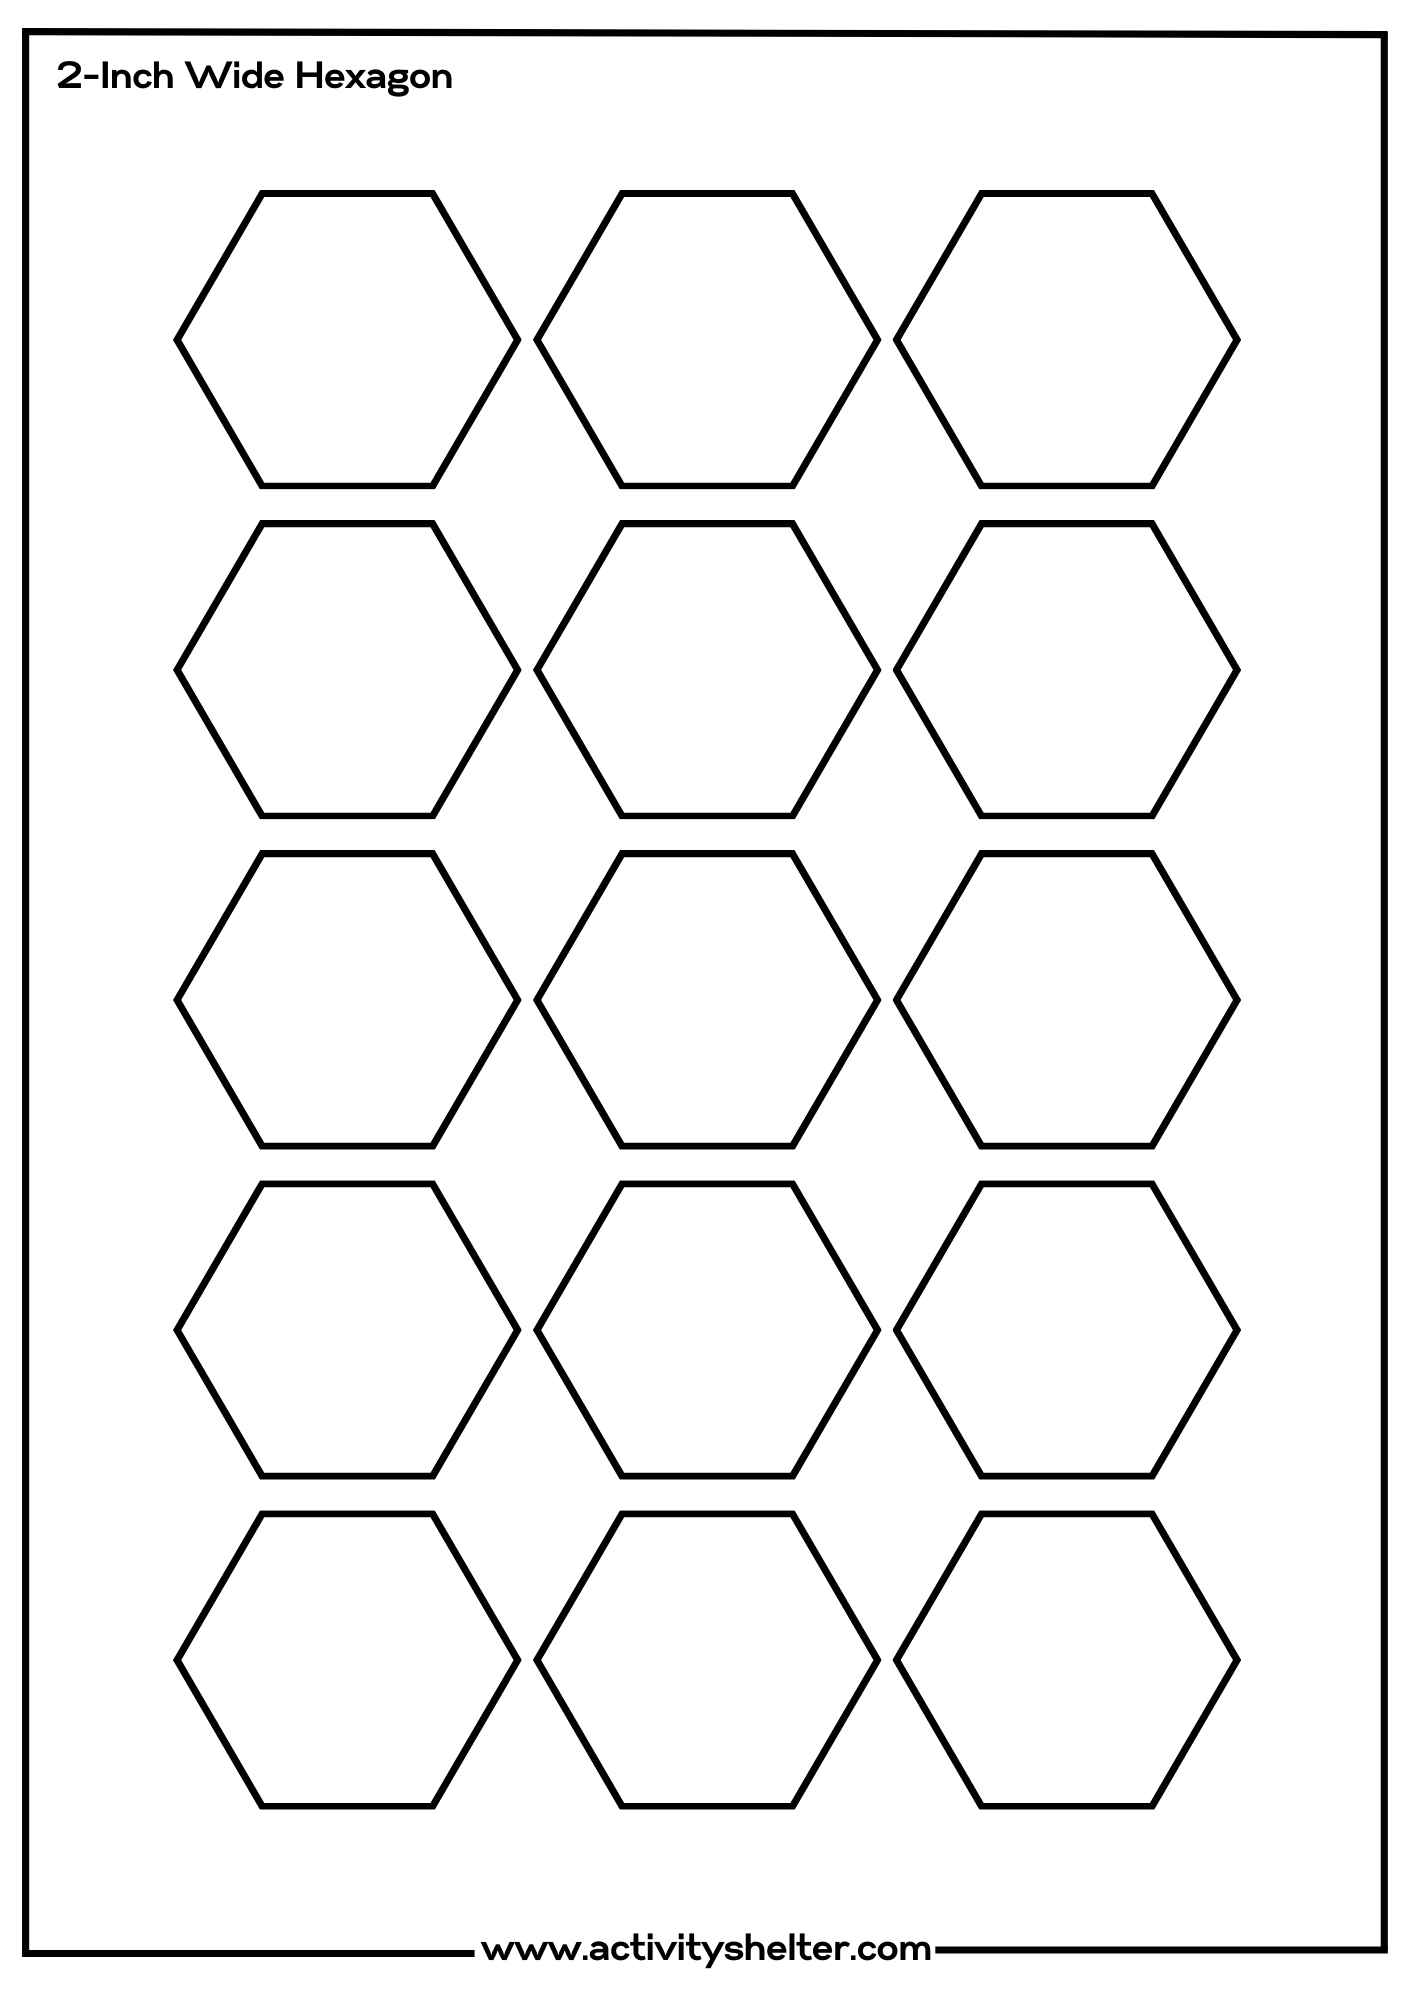 Hexagon Printable Template 2-Inch Wide